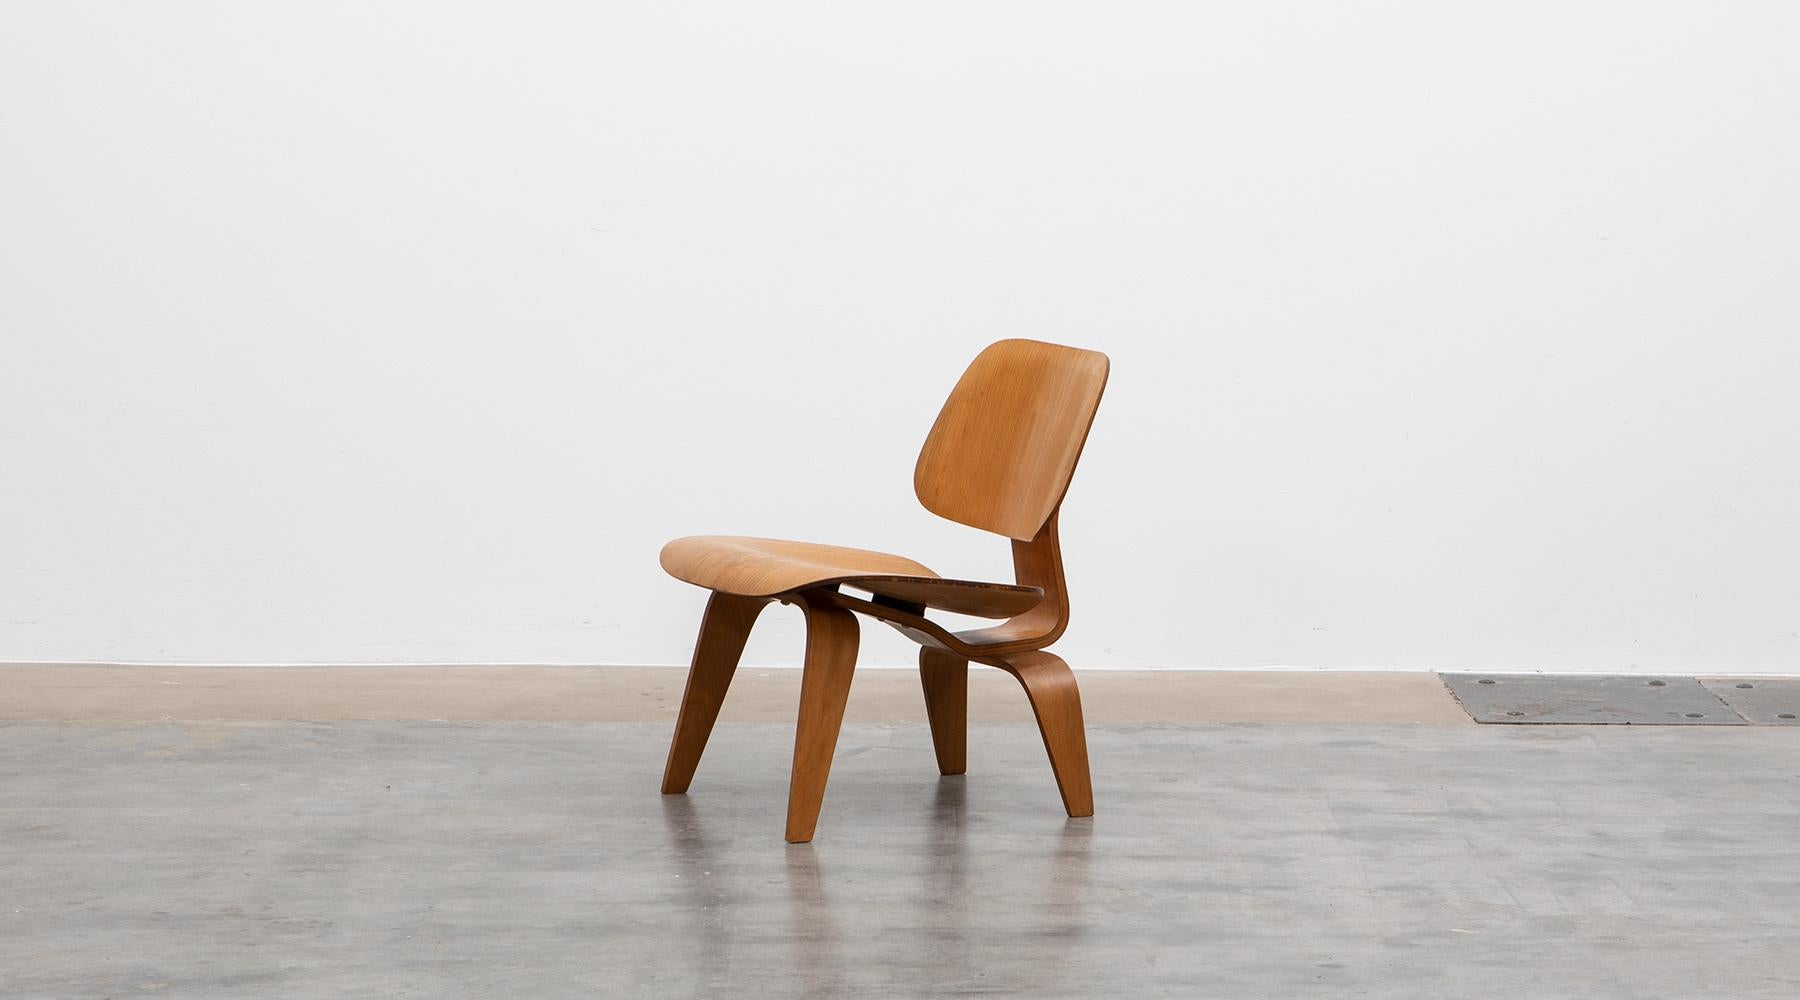 DCW Chair, plywood in ash, Charles & Ray Eames

Iconic DCW chair by famous Charles & Ray Eames. The unusual organic shape of this object shows Charles & Ray Eames innovative use of lumber-core plywood. Manufactured by Herman Miller. It dates back to